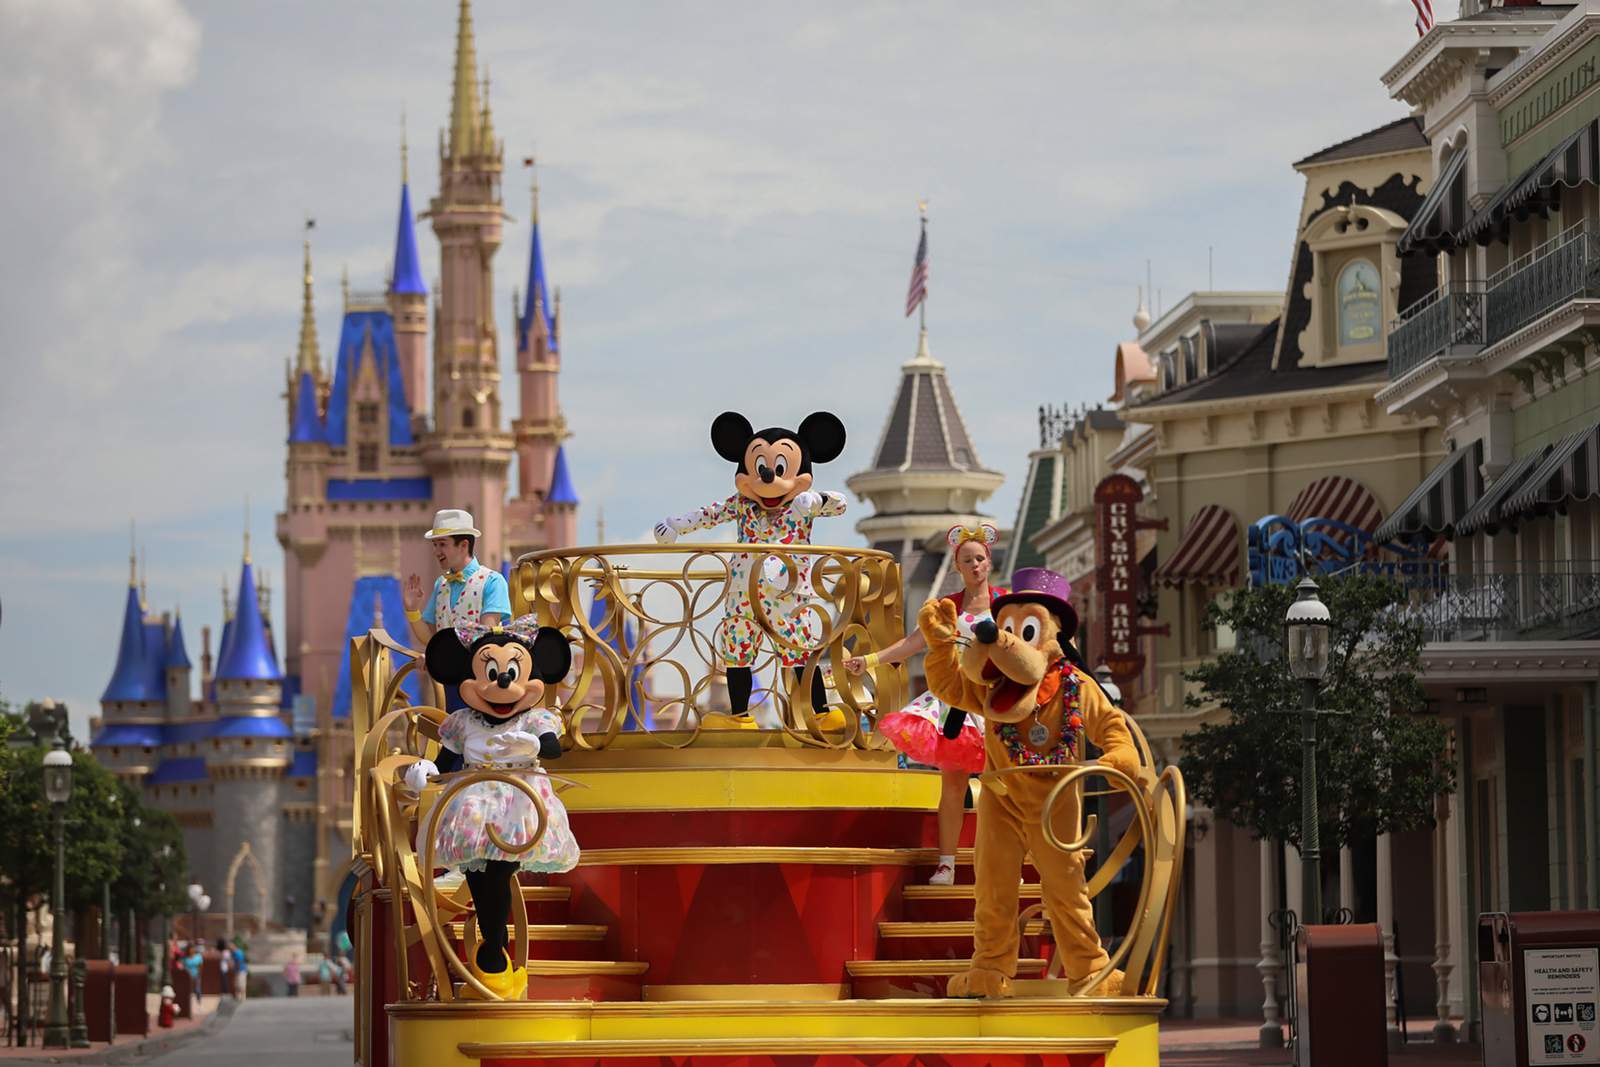 Walt Disney World’s reservation system staying in place through early 2023